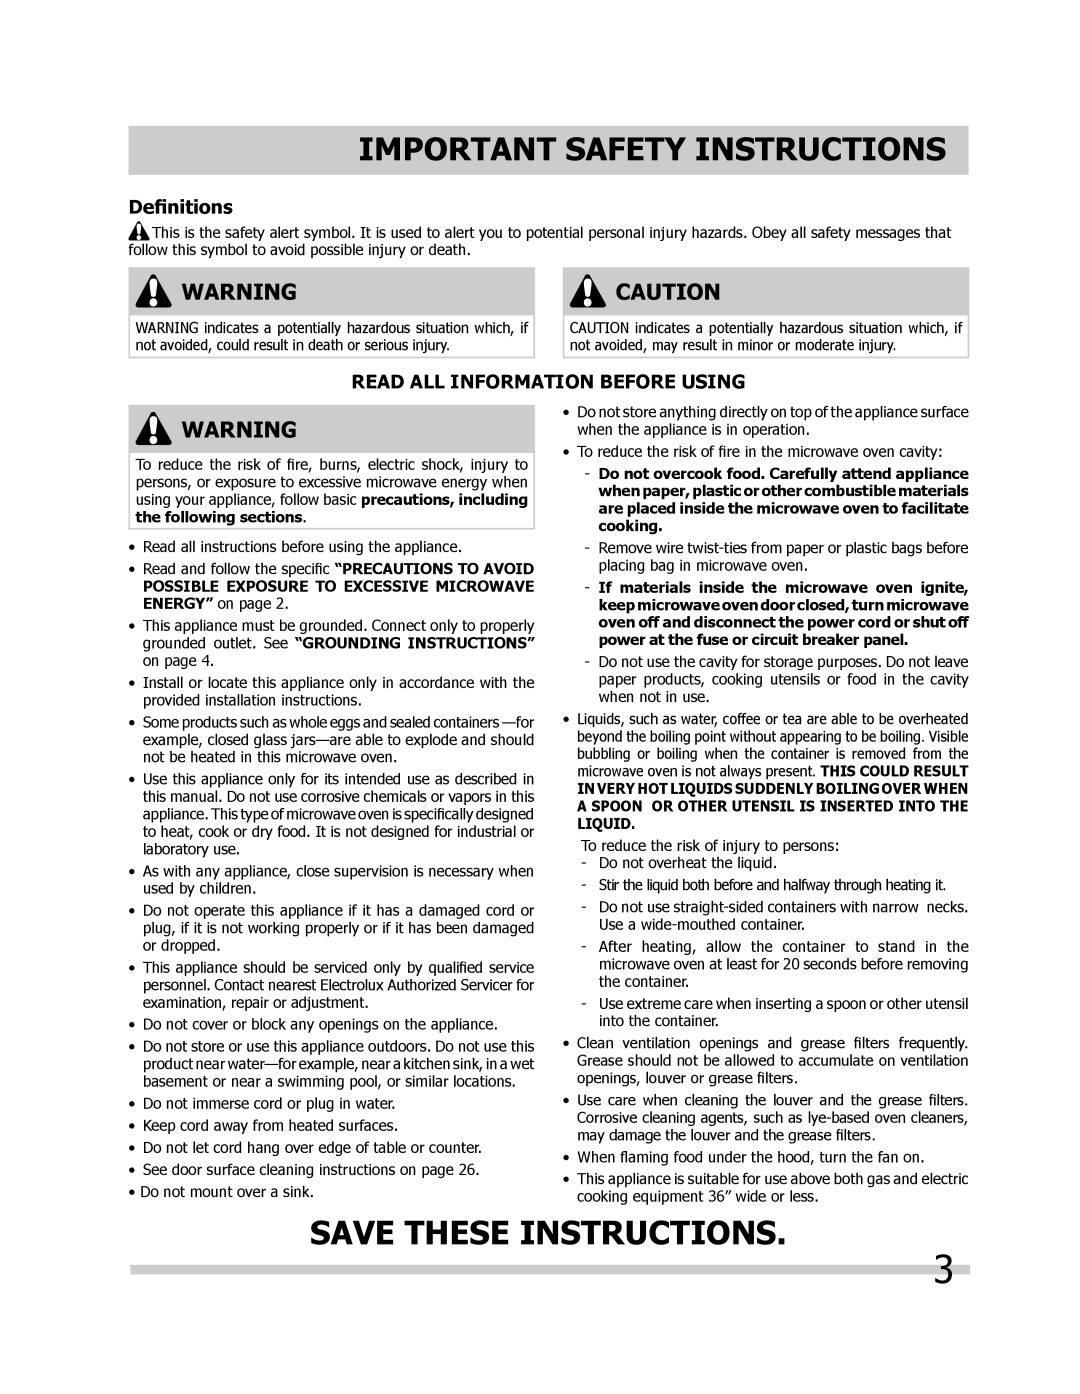 Frigidaire FGBM205KB Save These Instructions, Deﬁnitions, Read All Information Before Using, Important Safety Instructions 